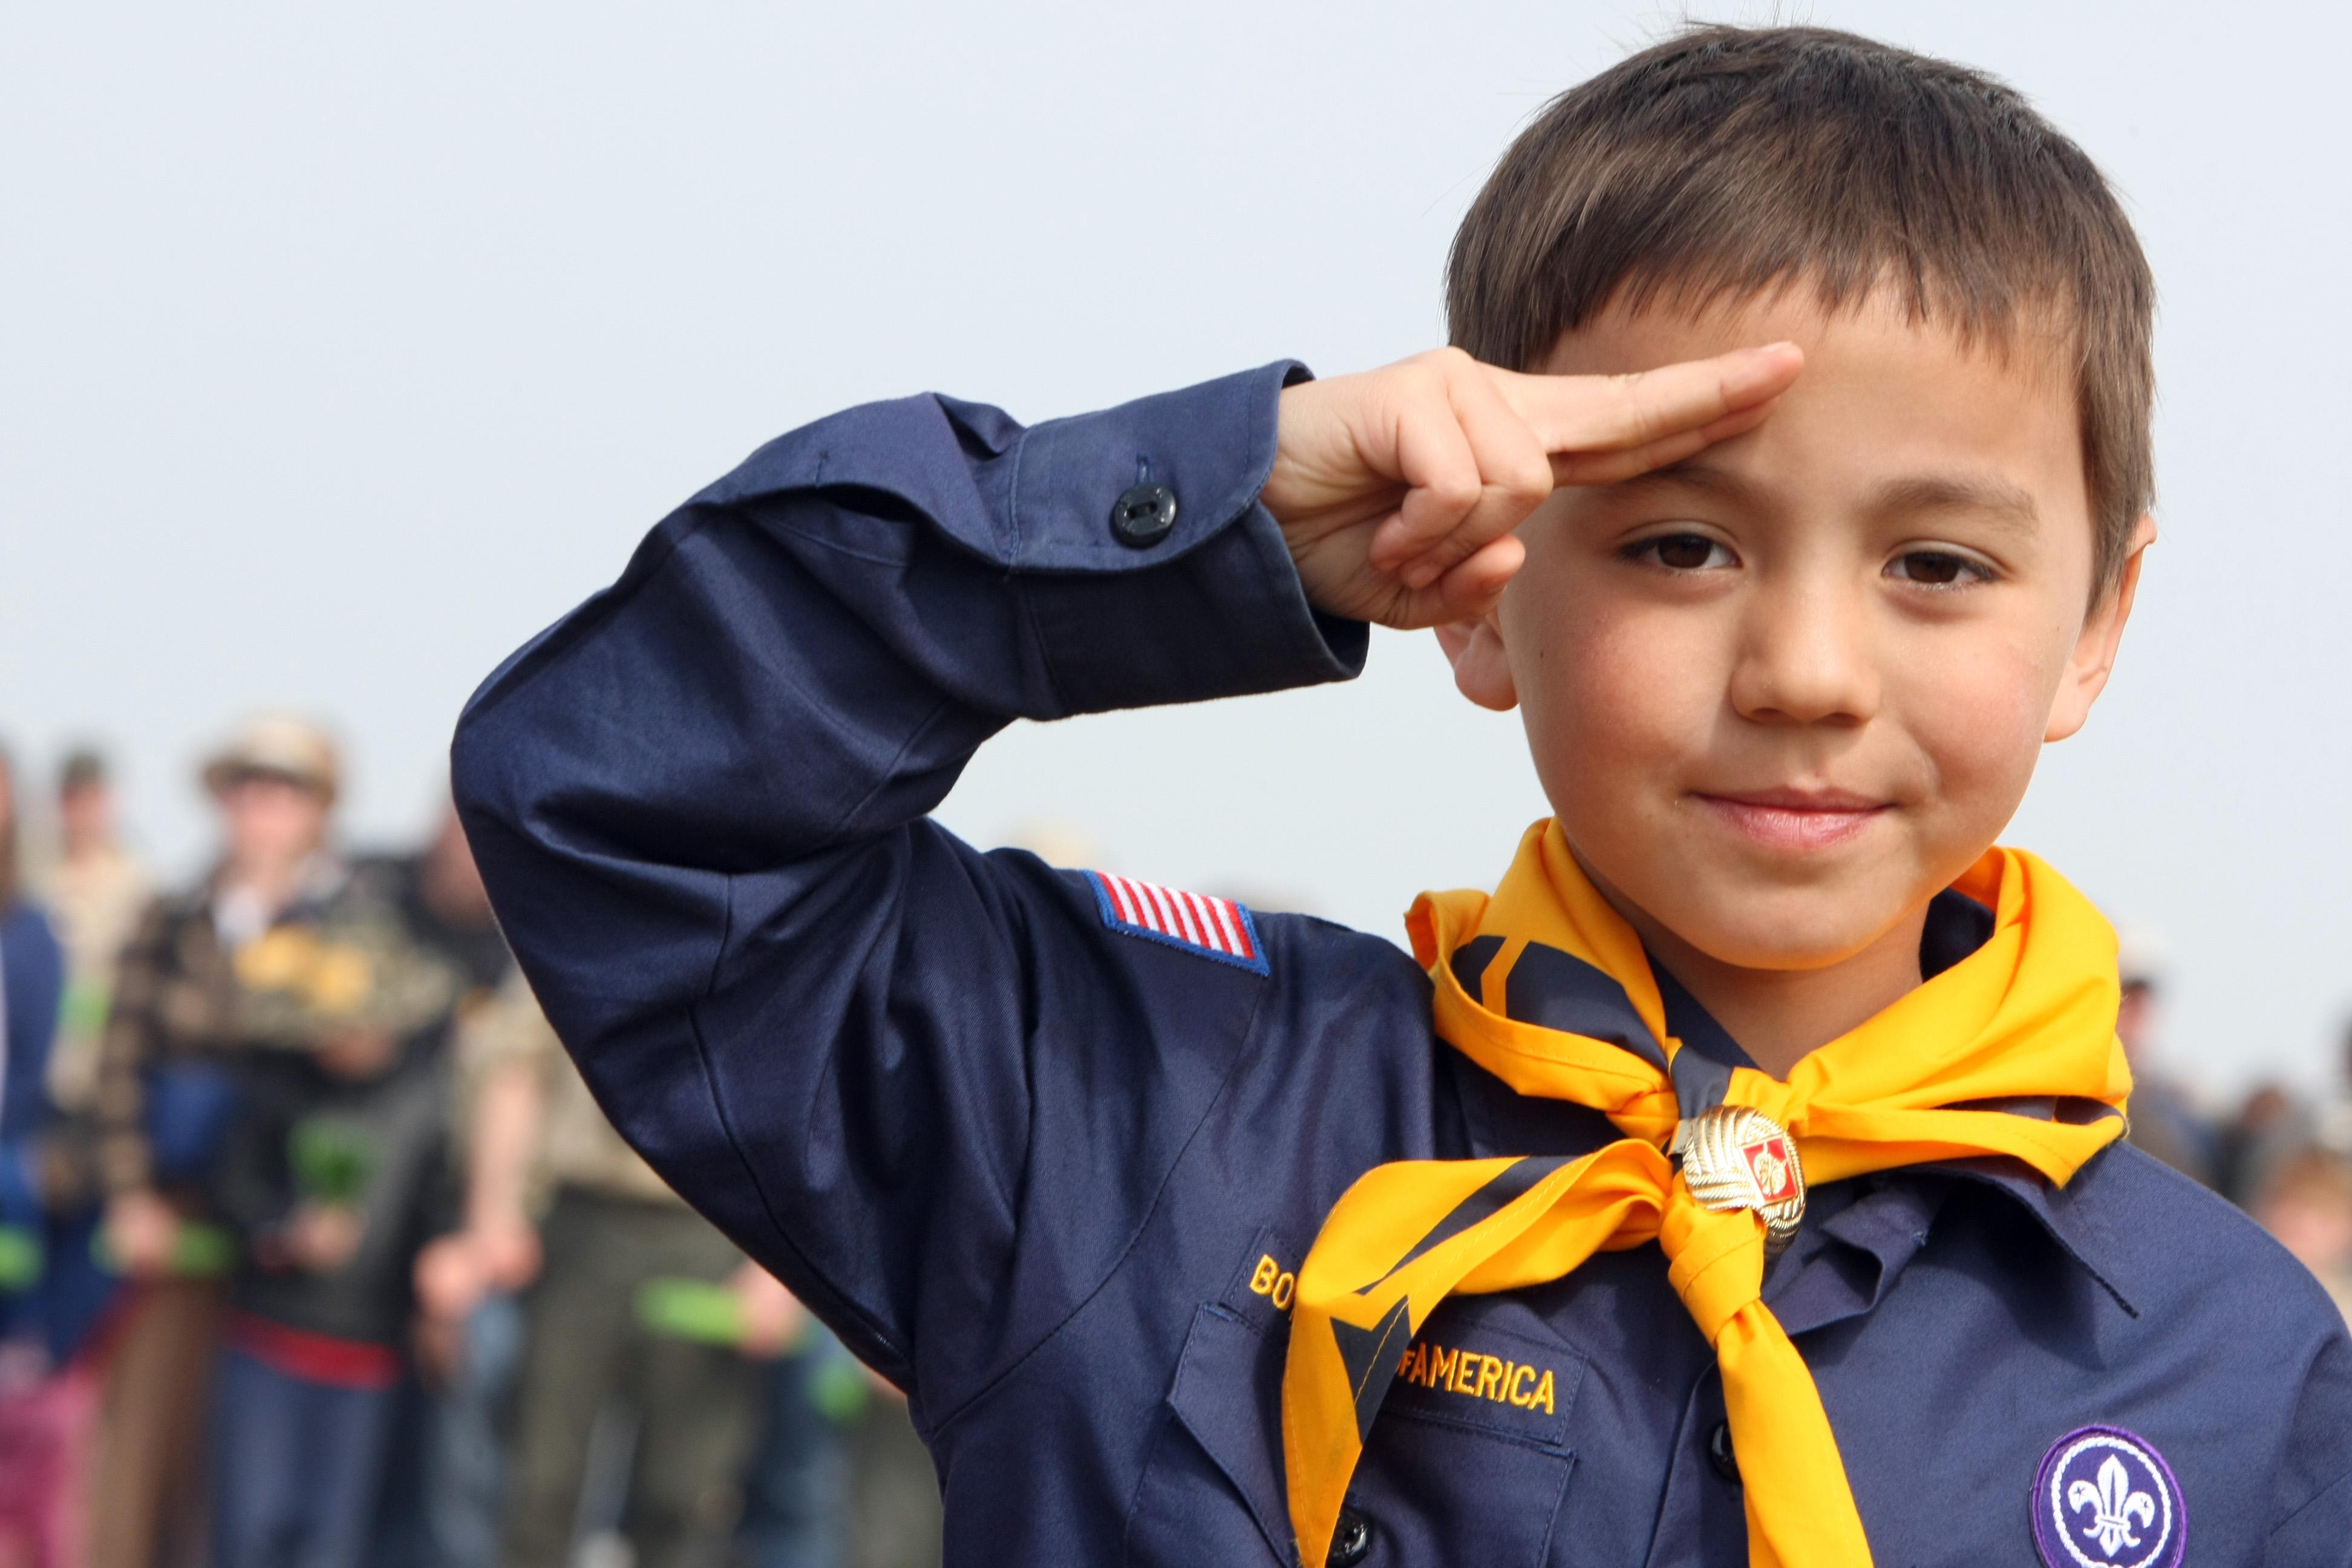 TODAY ISNATIONAL BOY SCOUTS DAY